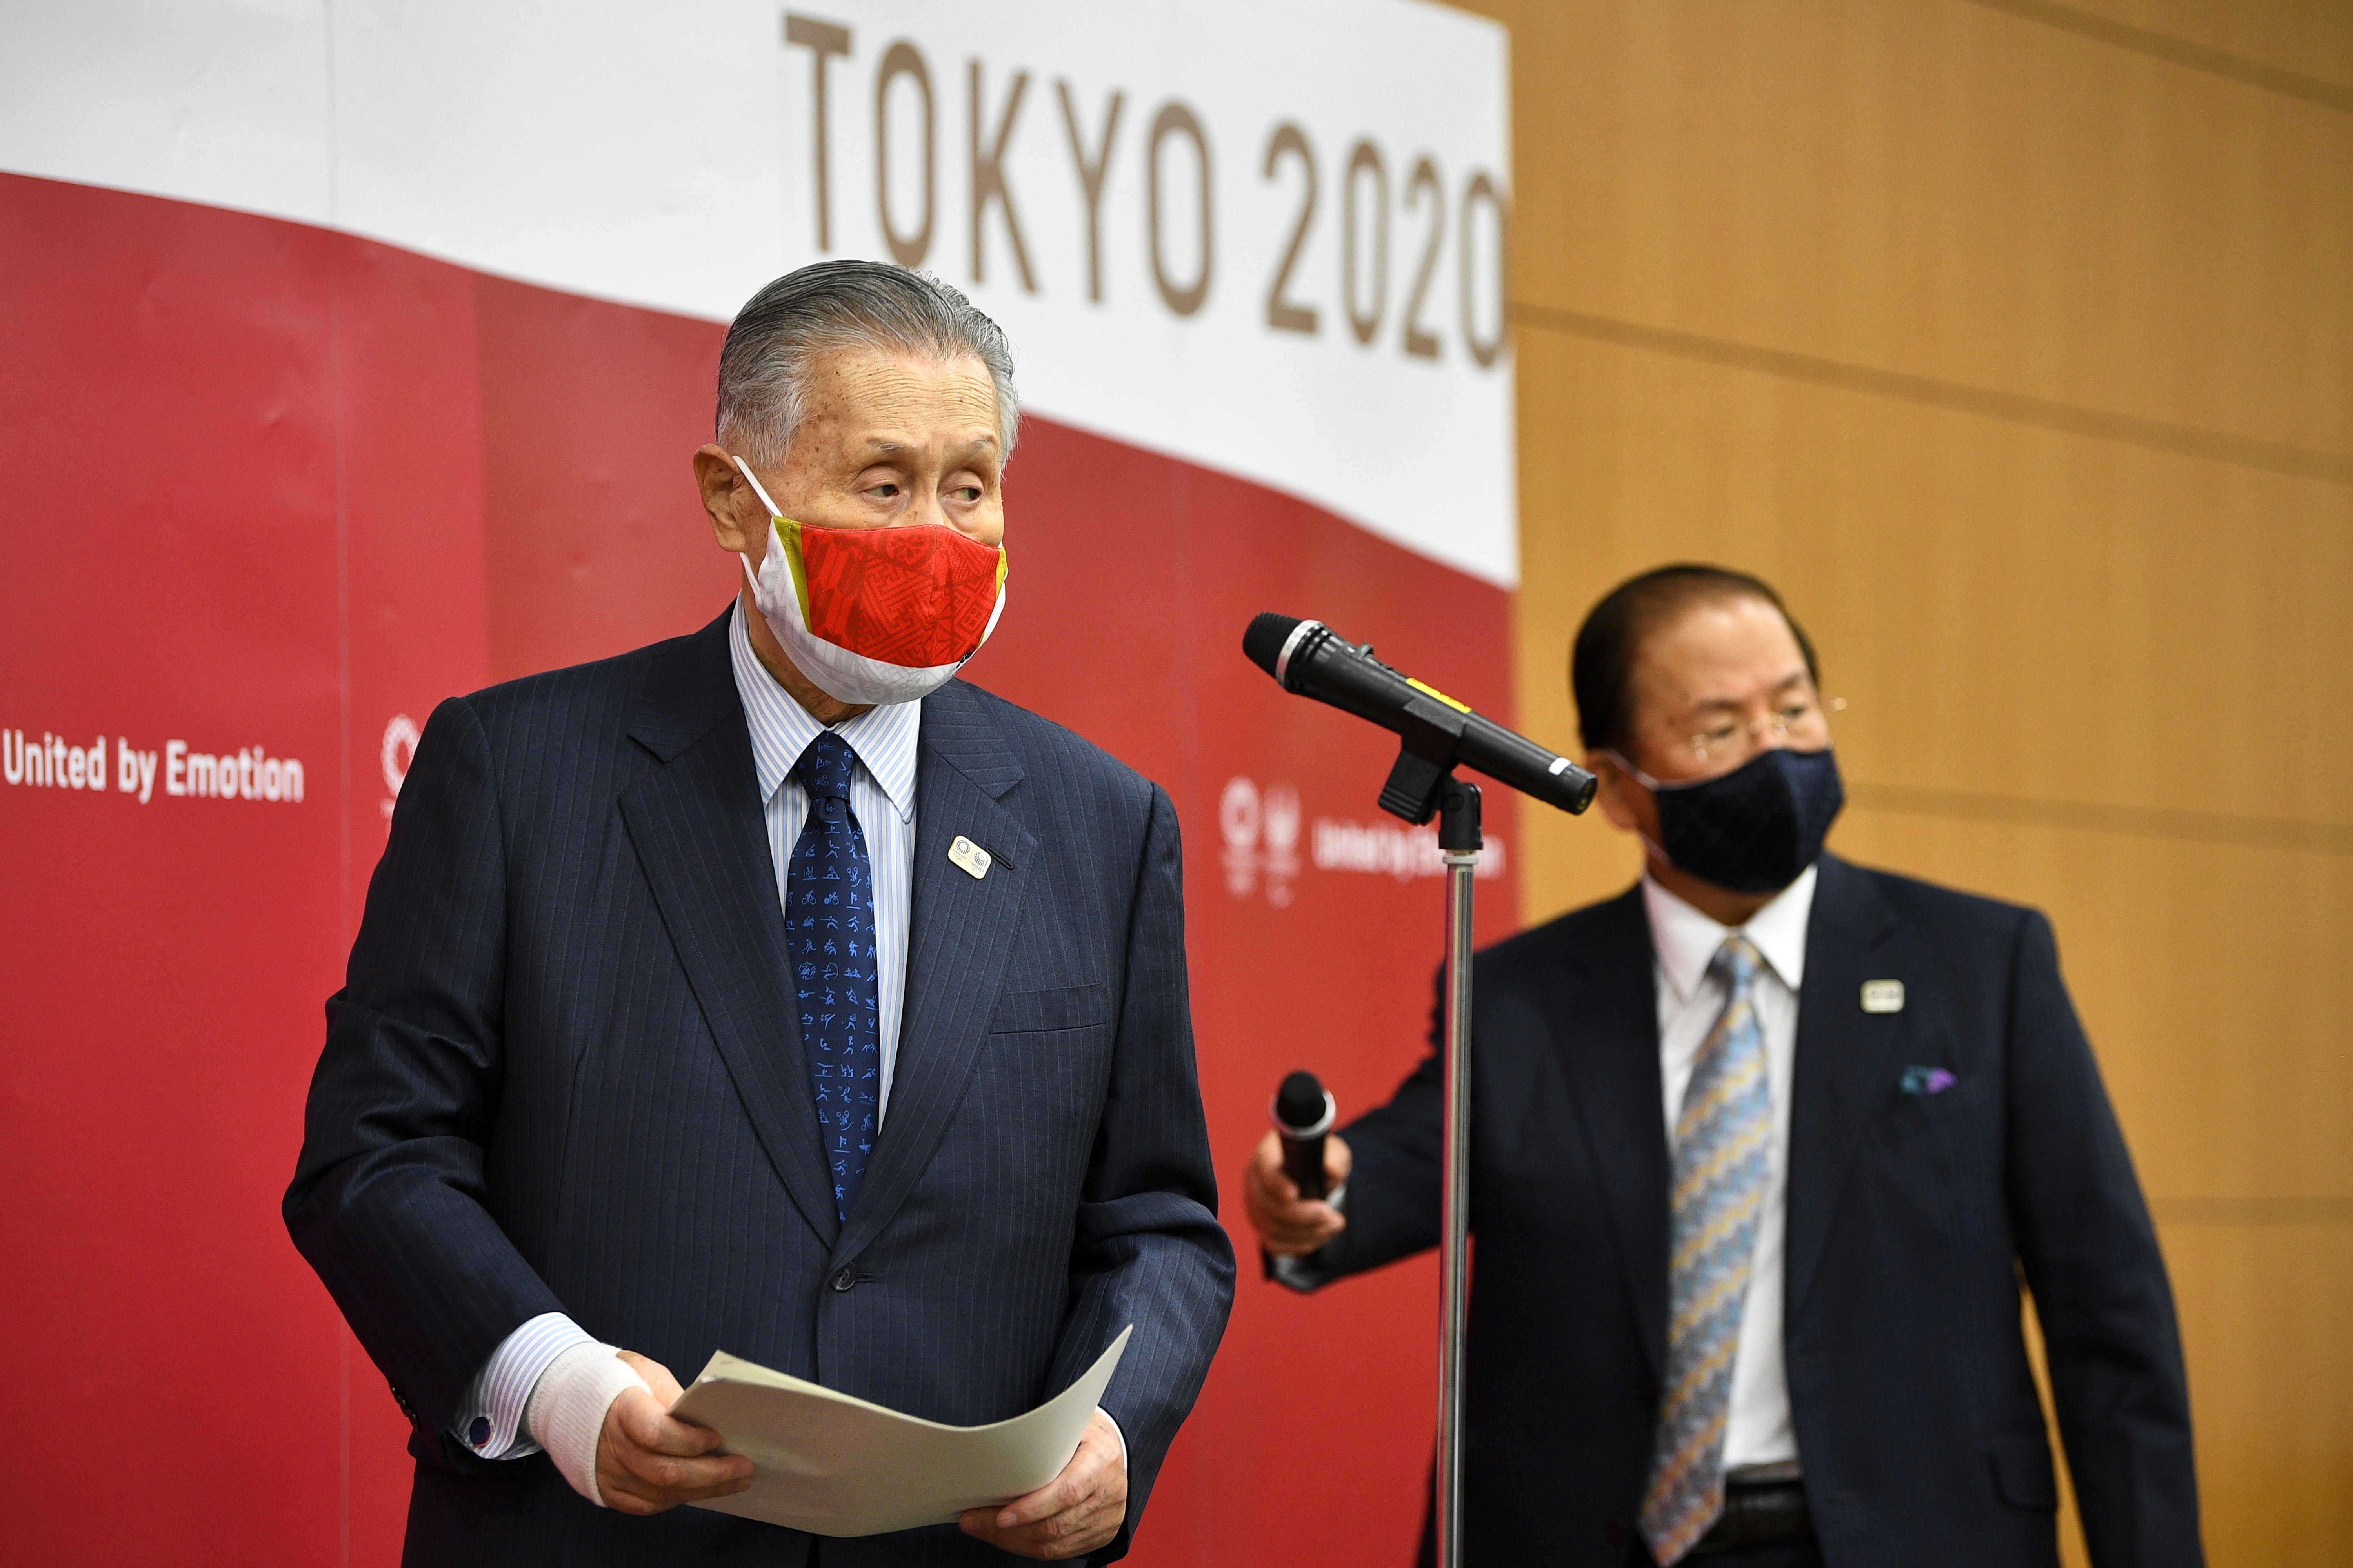 The 12-month delay to Tokyo 2020 will cost organisers and additional £2bn